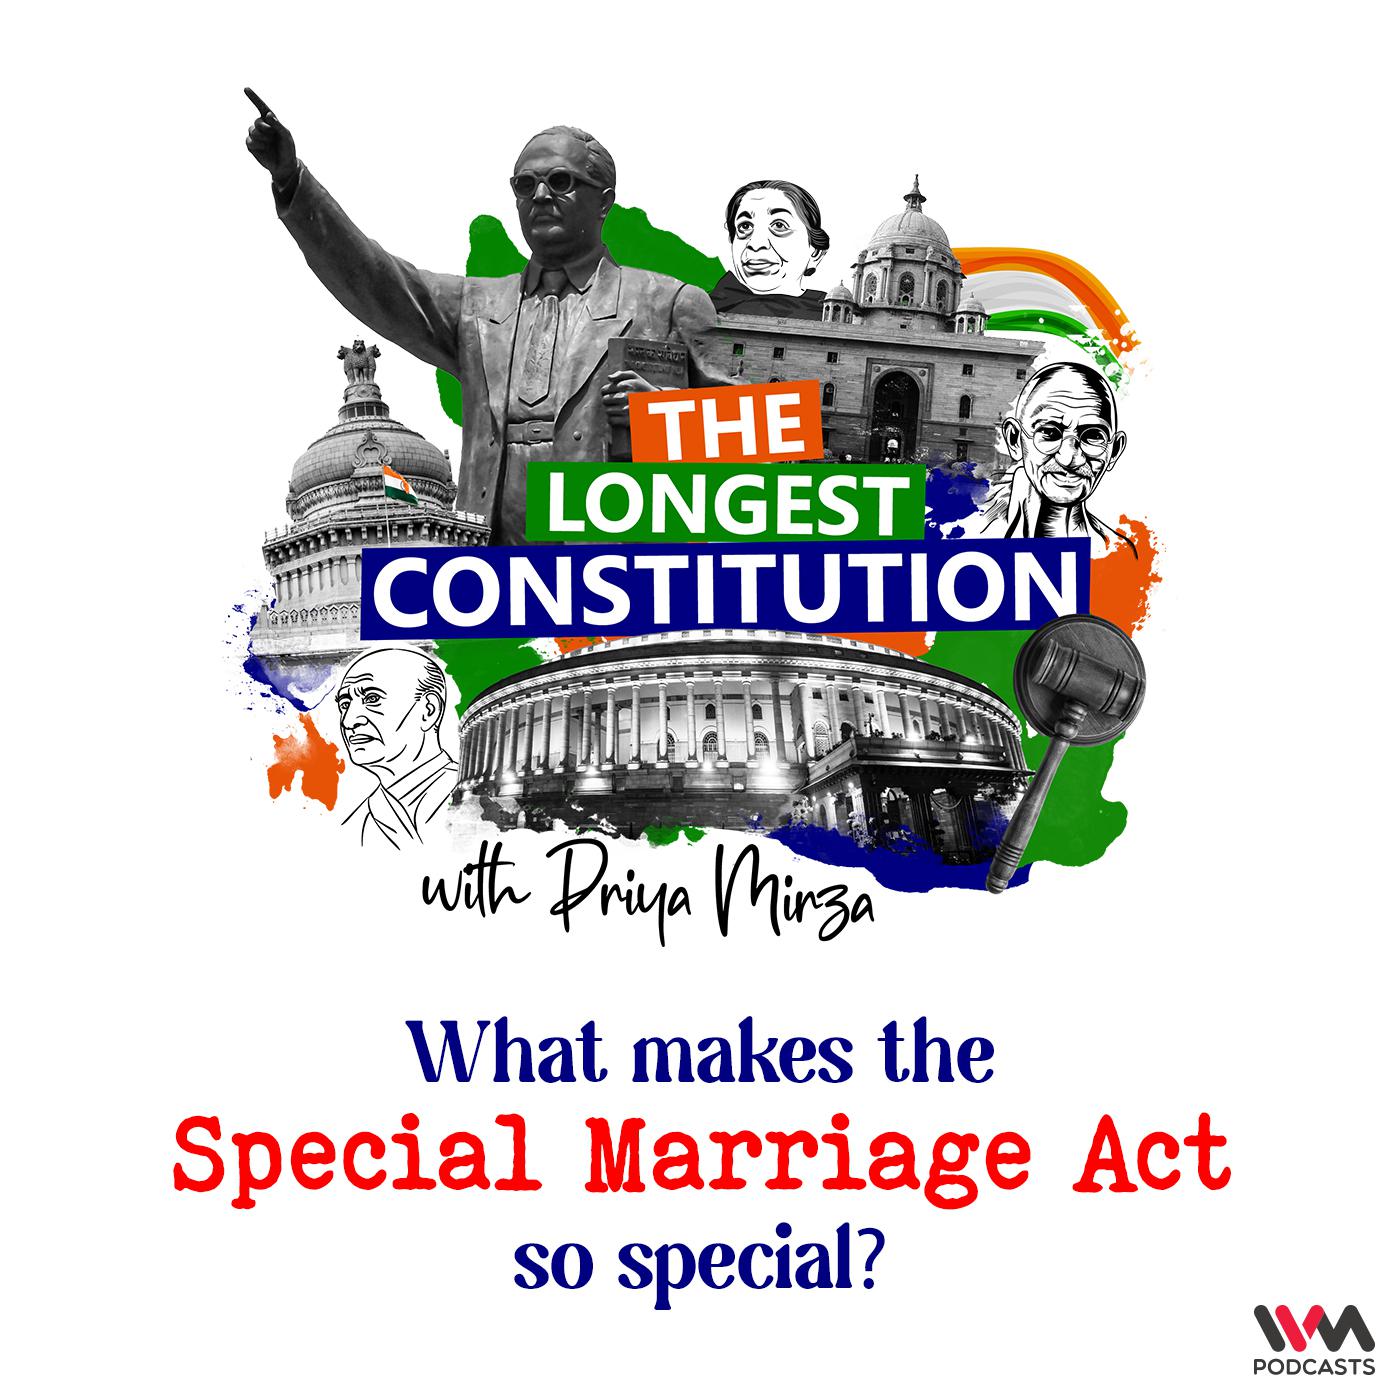 What makes the Special Marriage Act so special?